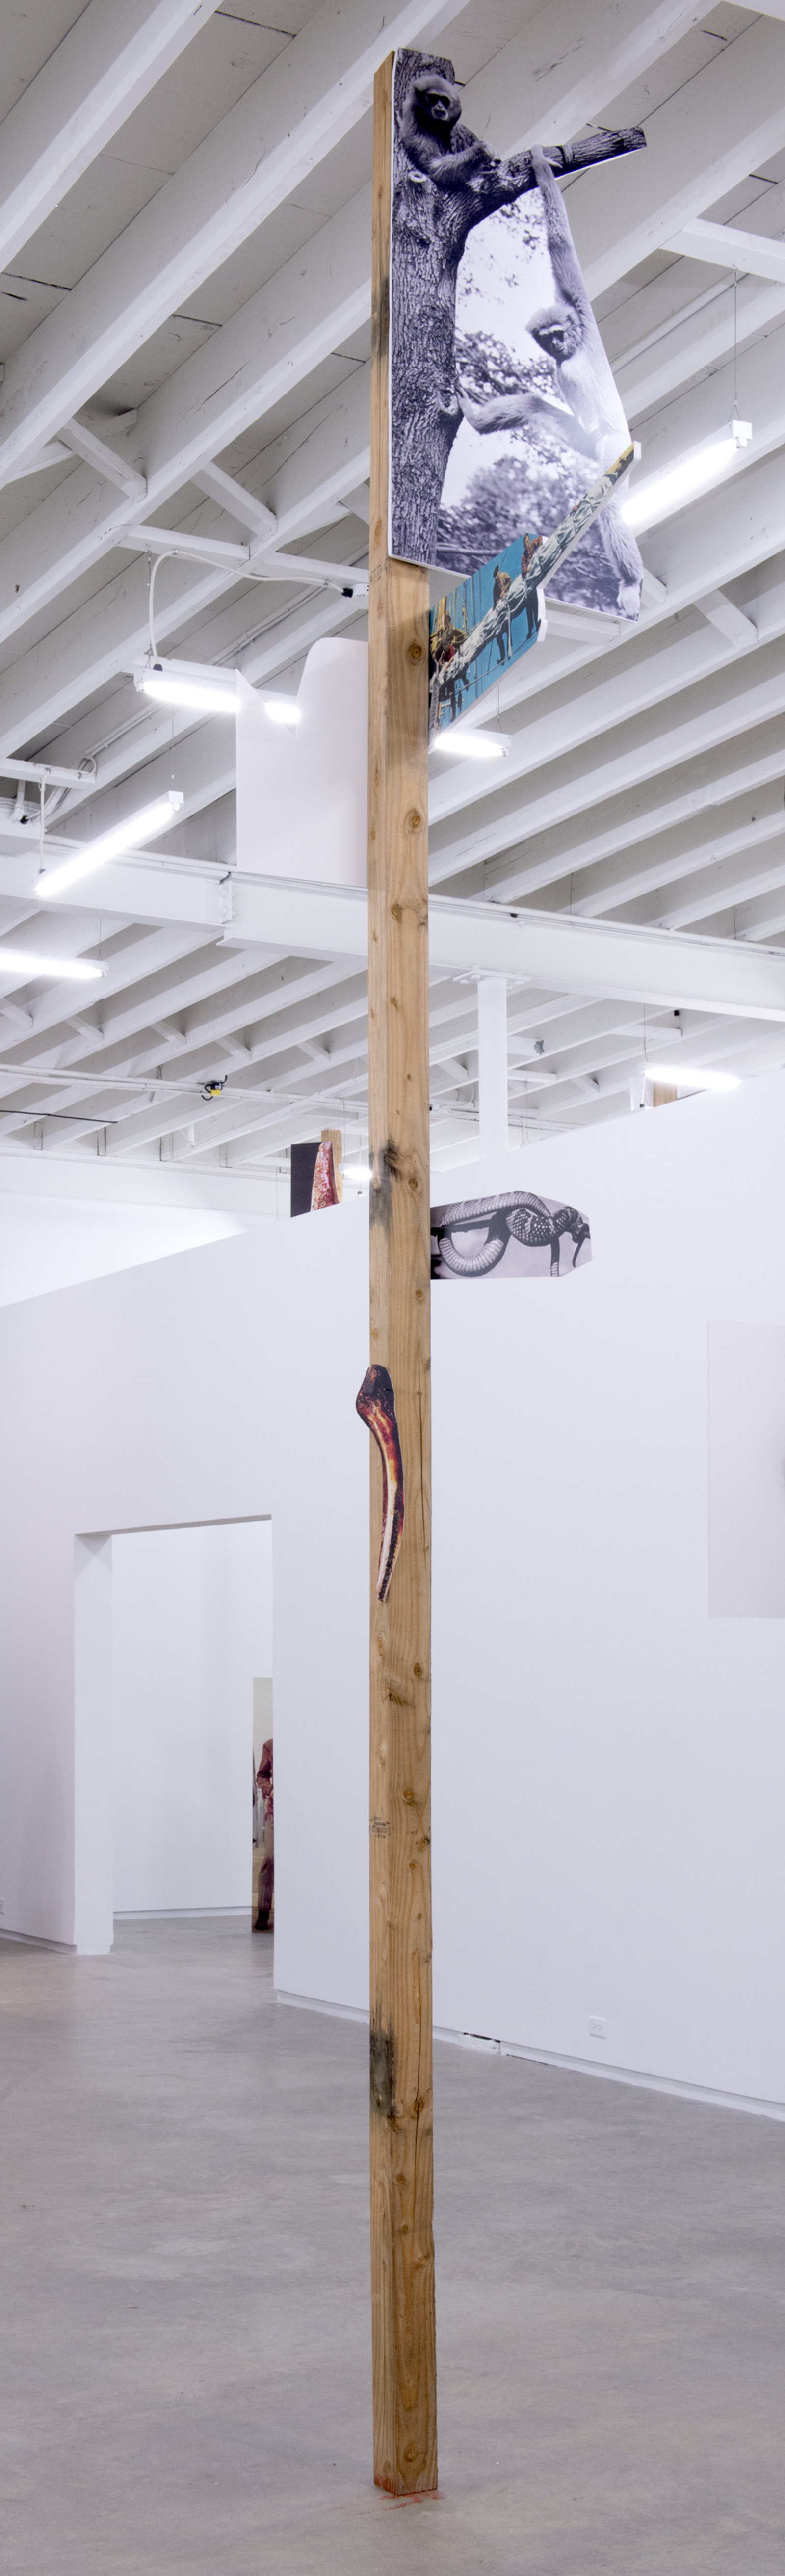 Geoffrey Farmer, The other ate one man, one man was set adrift, one man turned into a snake, one man washed ashore and became a statue and the others eyes were stolen by the owl., 2014, douglas fir pole, 6 photographs mounted on foamcore, 200 x 4 x 4 in. (508 x 9 x 9 cm)